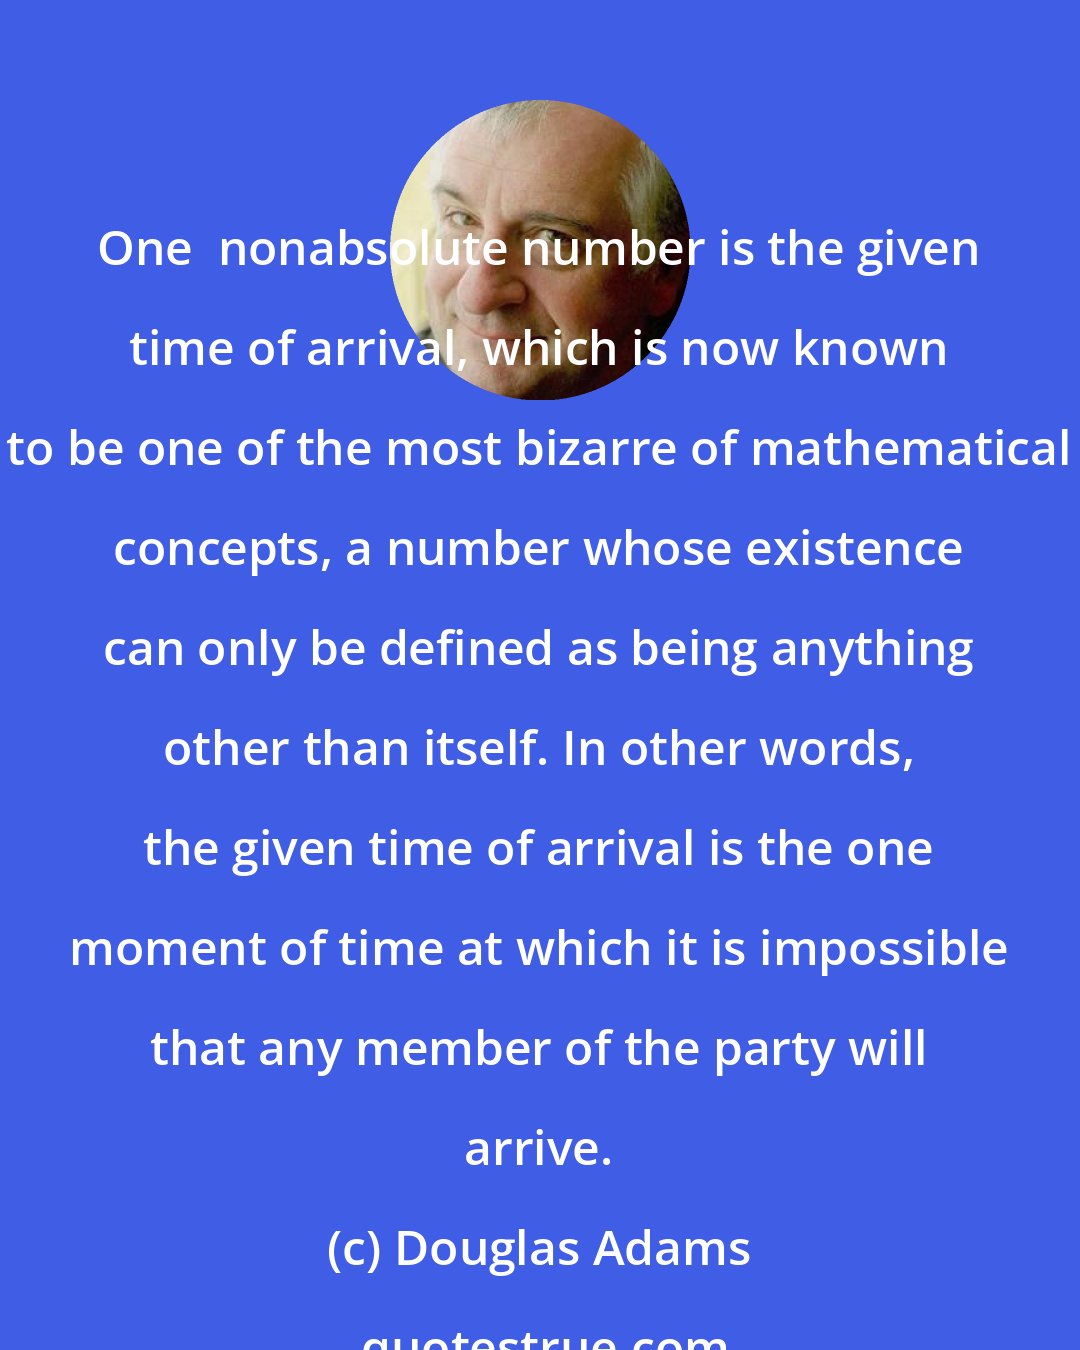 Douglas Adams: One  nonabsolute number is the given time of arrival, which is now known to be one of the most bizarre of mathematical concepts, a number whose existence can only be defined as being anything other than itself. In other words, the given time of arrival is the one moment of time at which it is impossible that any member of the party will arrive.